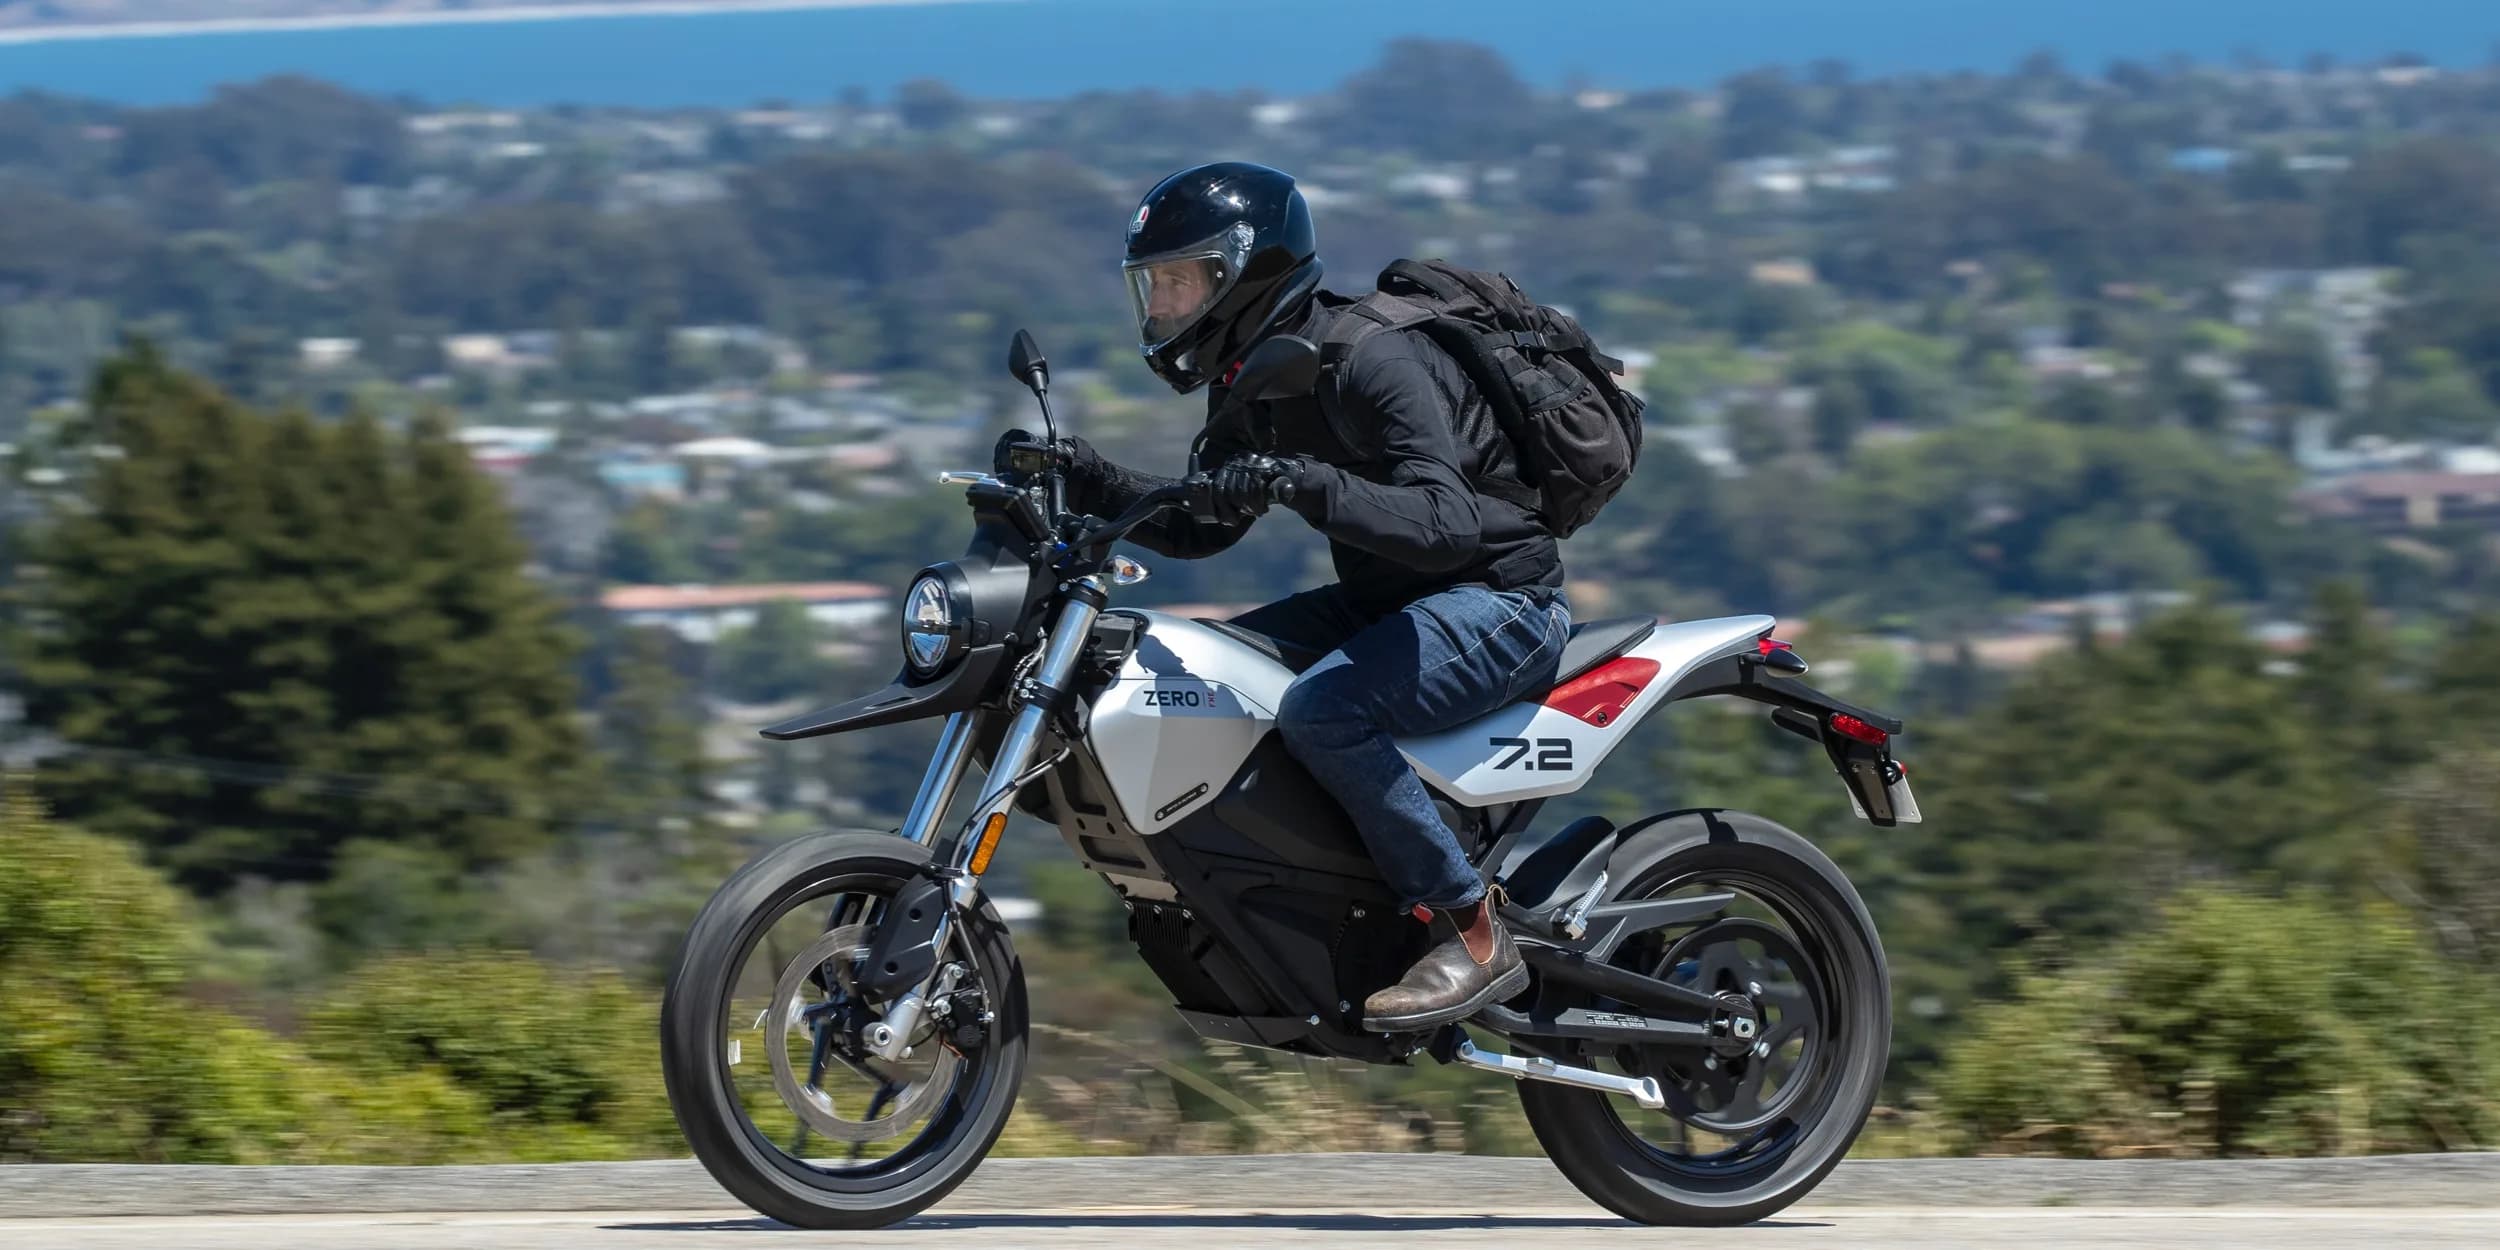 Best Street Legal Enduro Motorcycle: We Review 5 Great Choices